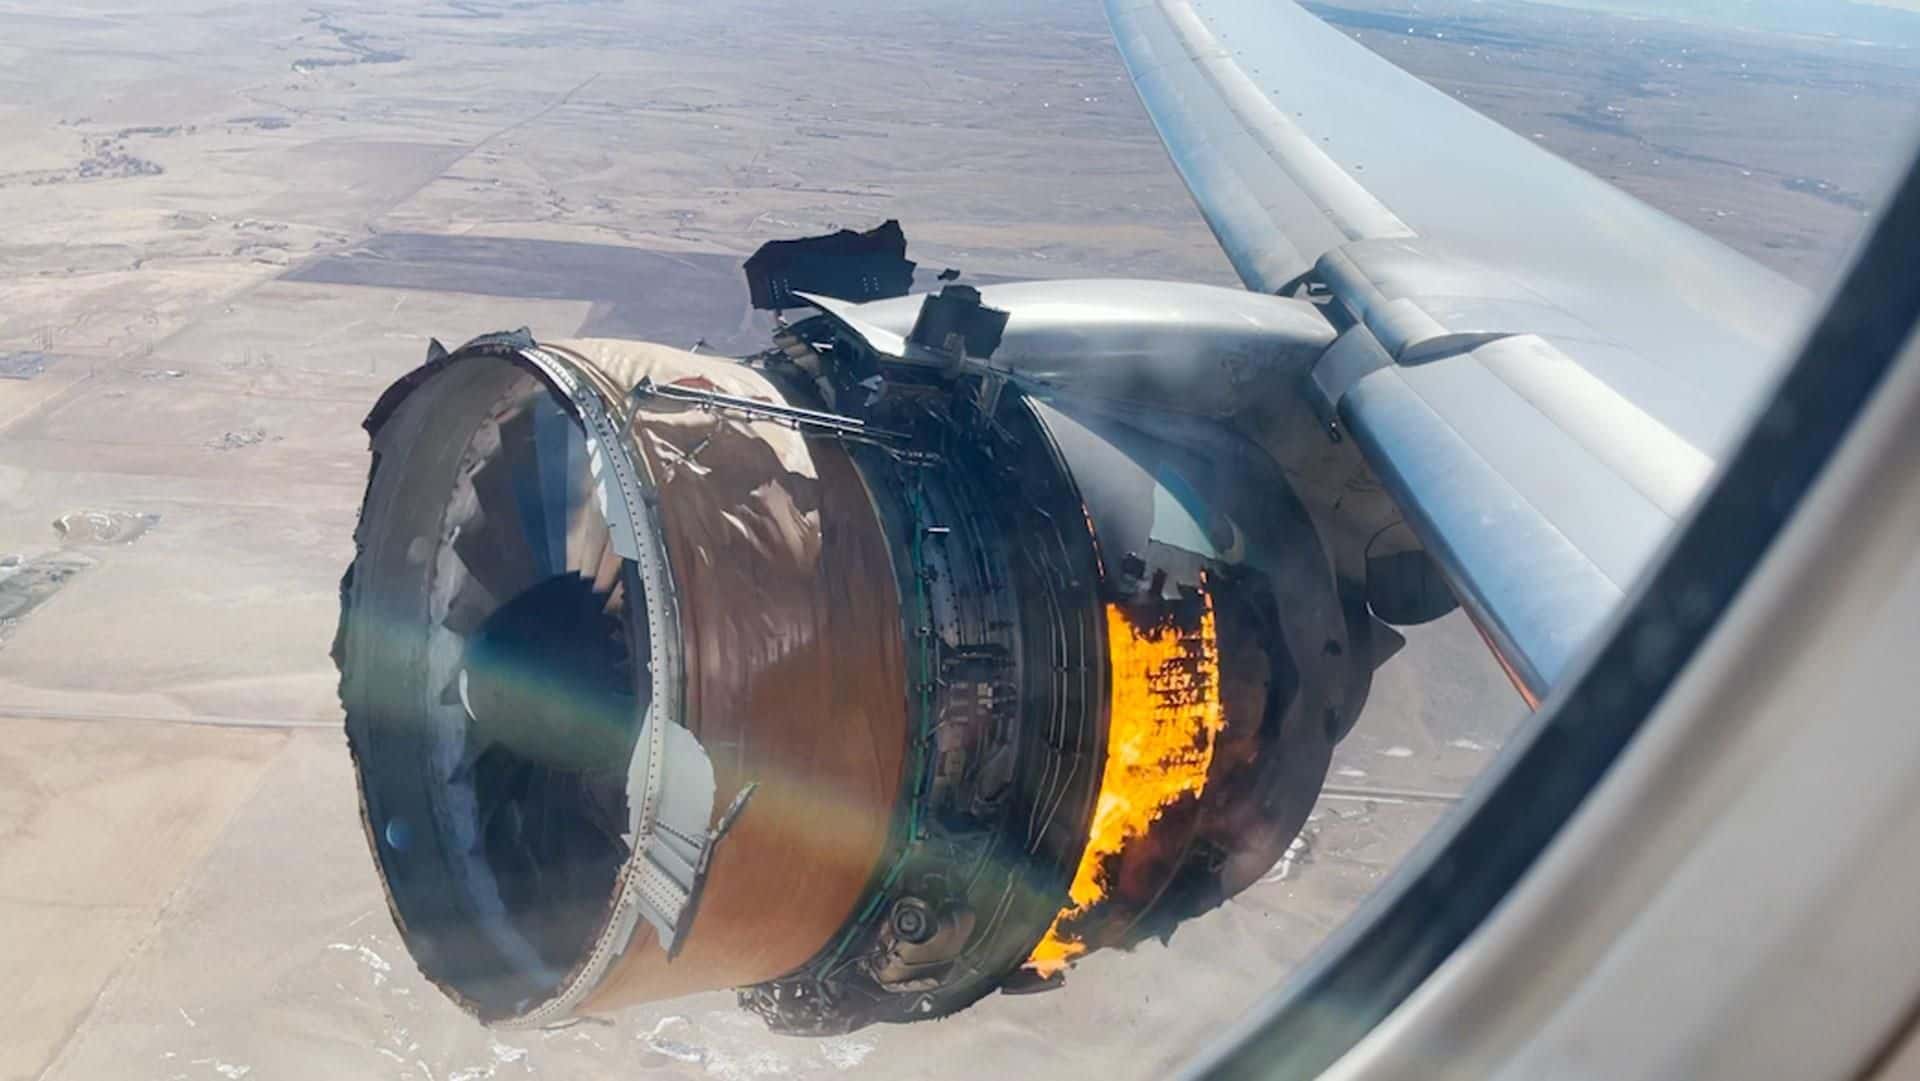 Boeing To Suspend The 777s Engine After Terrifying Video Showing Debris Shower In Denver